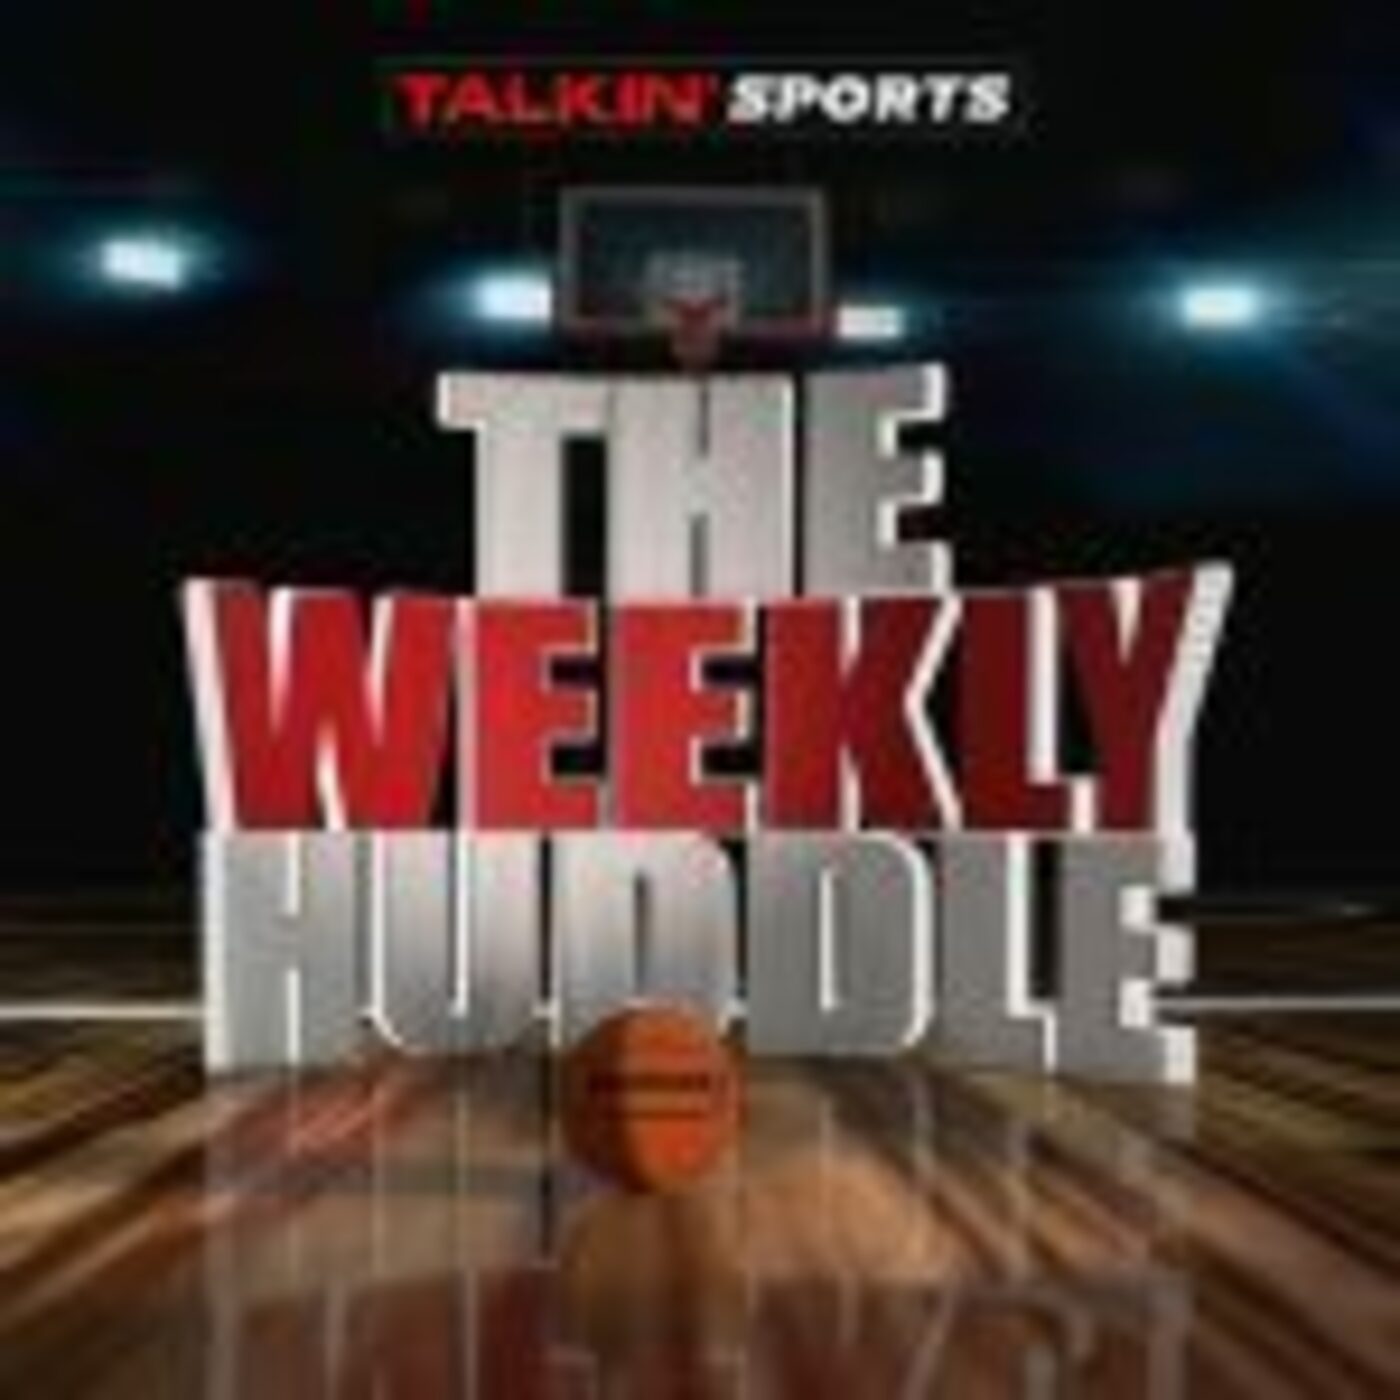 Weekly Huddle Podcast Talkin’ Jazz with Kristen Kenney: Why the Suns are so tough for the Jazz